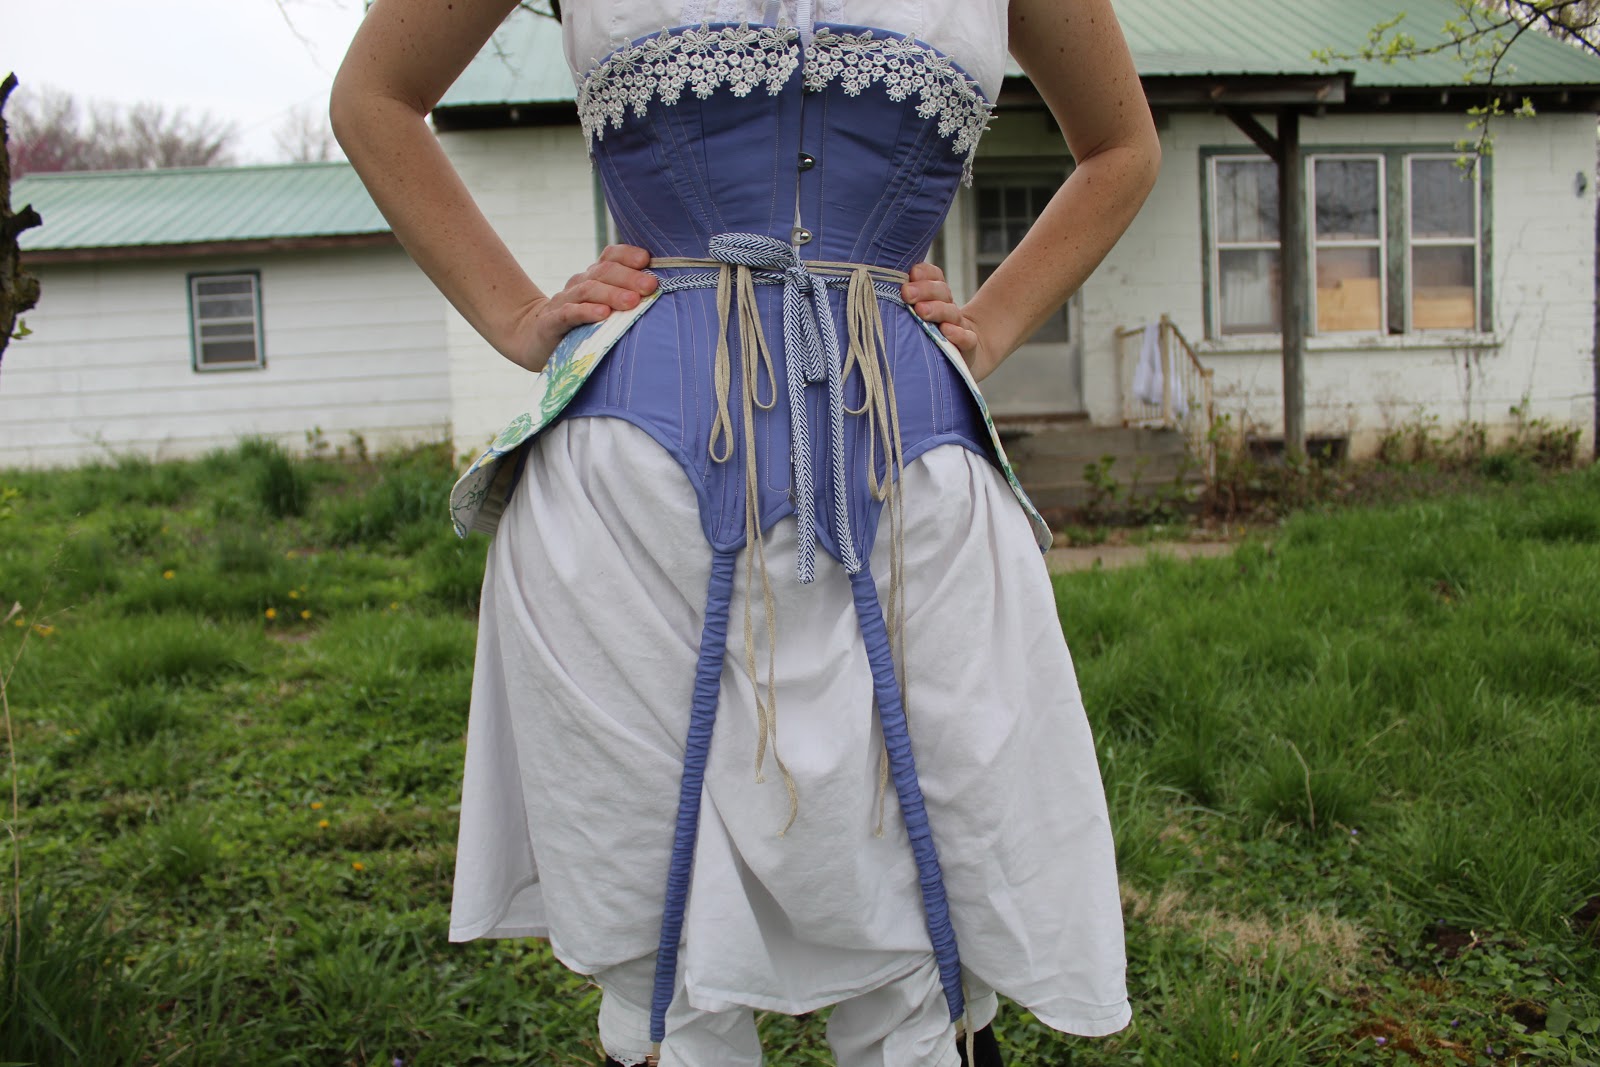 The Sewing Goatherd: The Black 1840's Corset